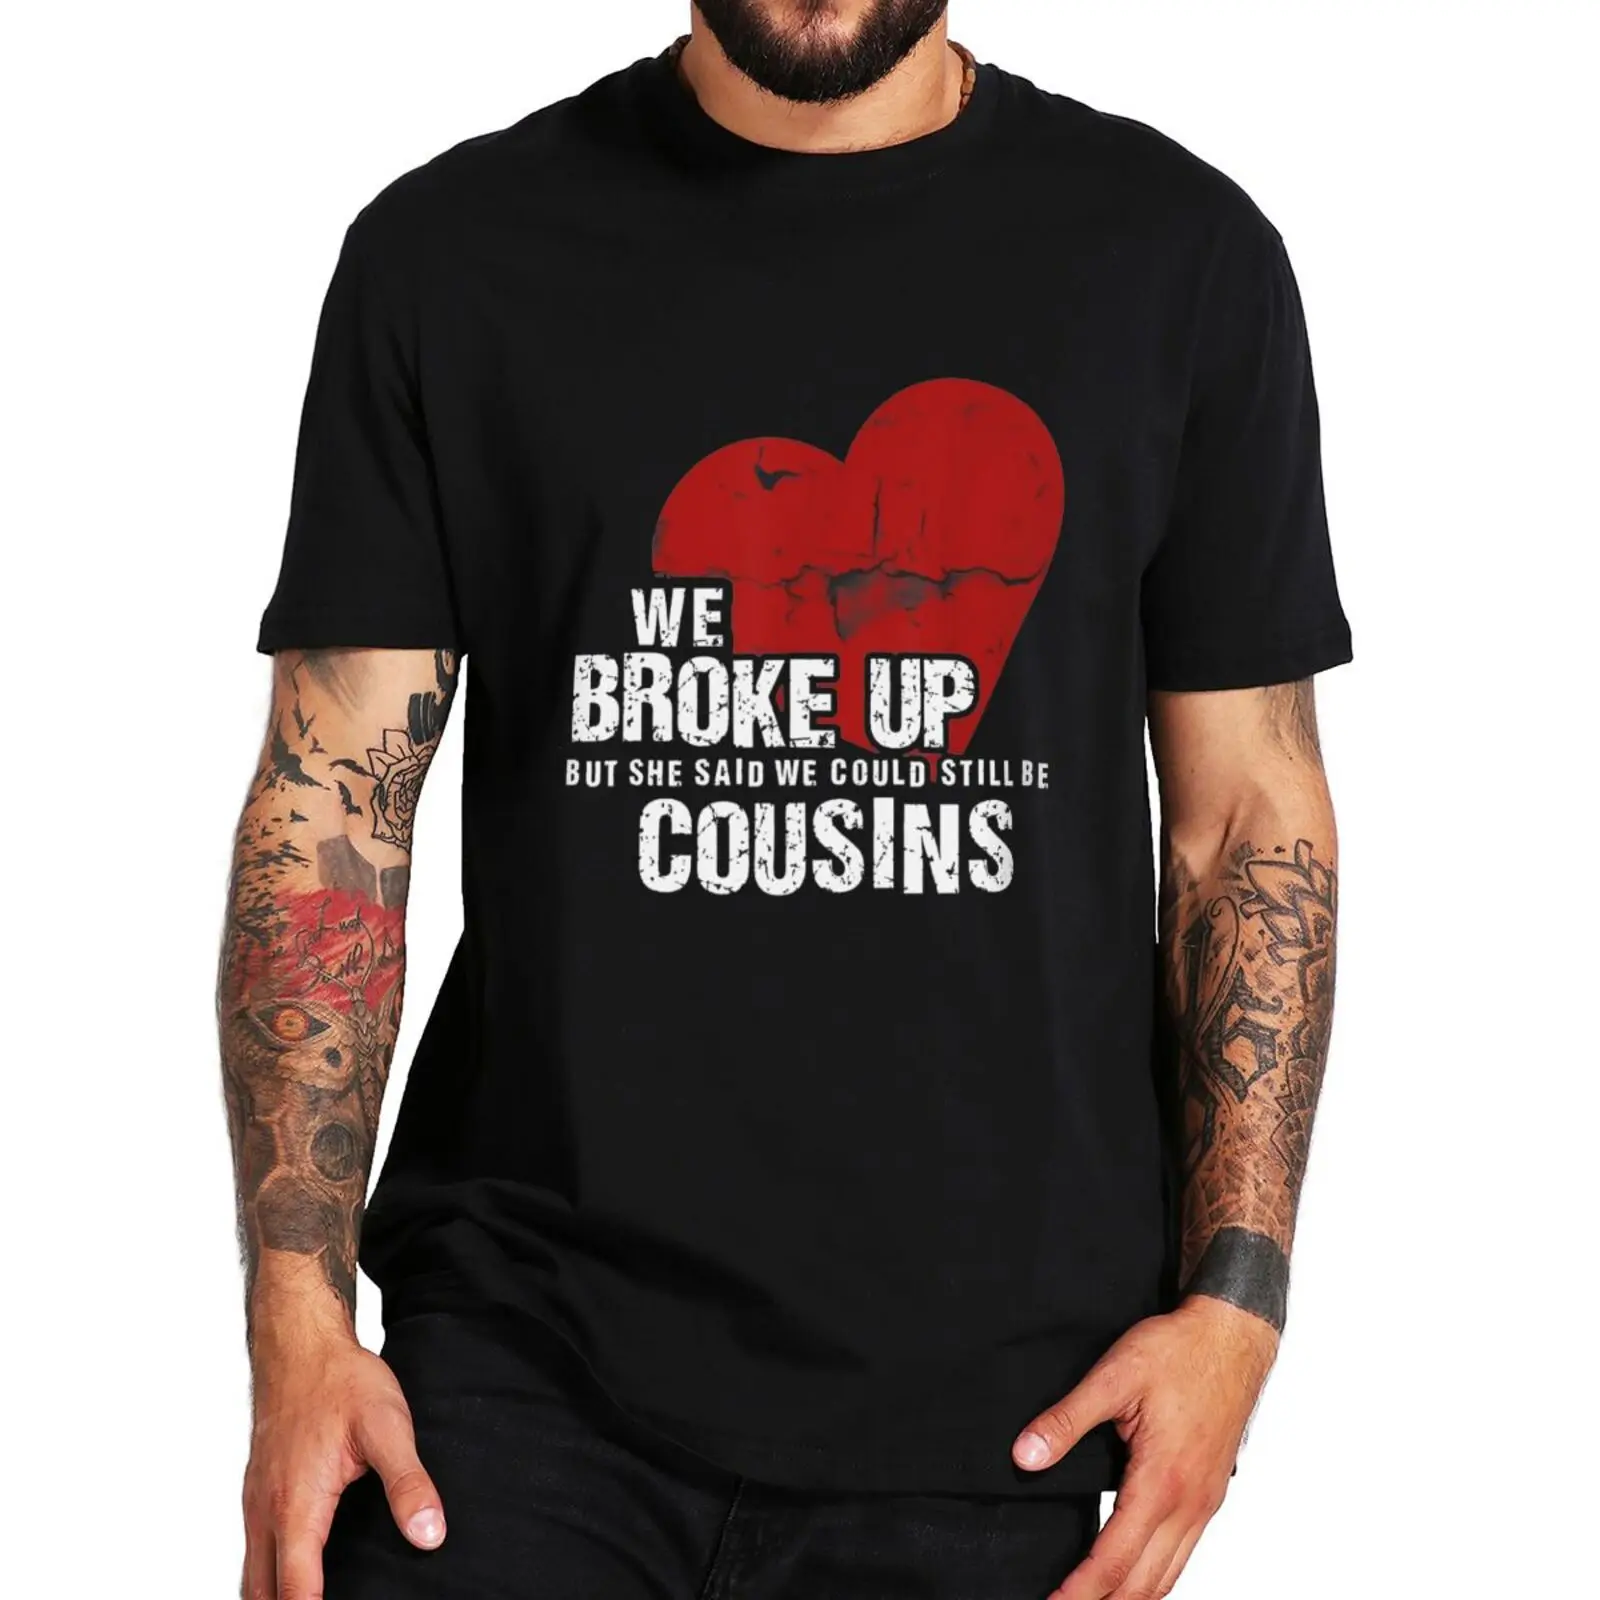 

We Broke Up But She Said We Could Still Be Cousins T Shirt Funny Jokes Couples Gift Tee Tops 100% Cotton Unisex Casual T-shirtrs